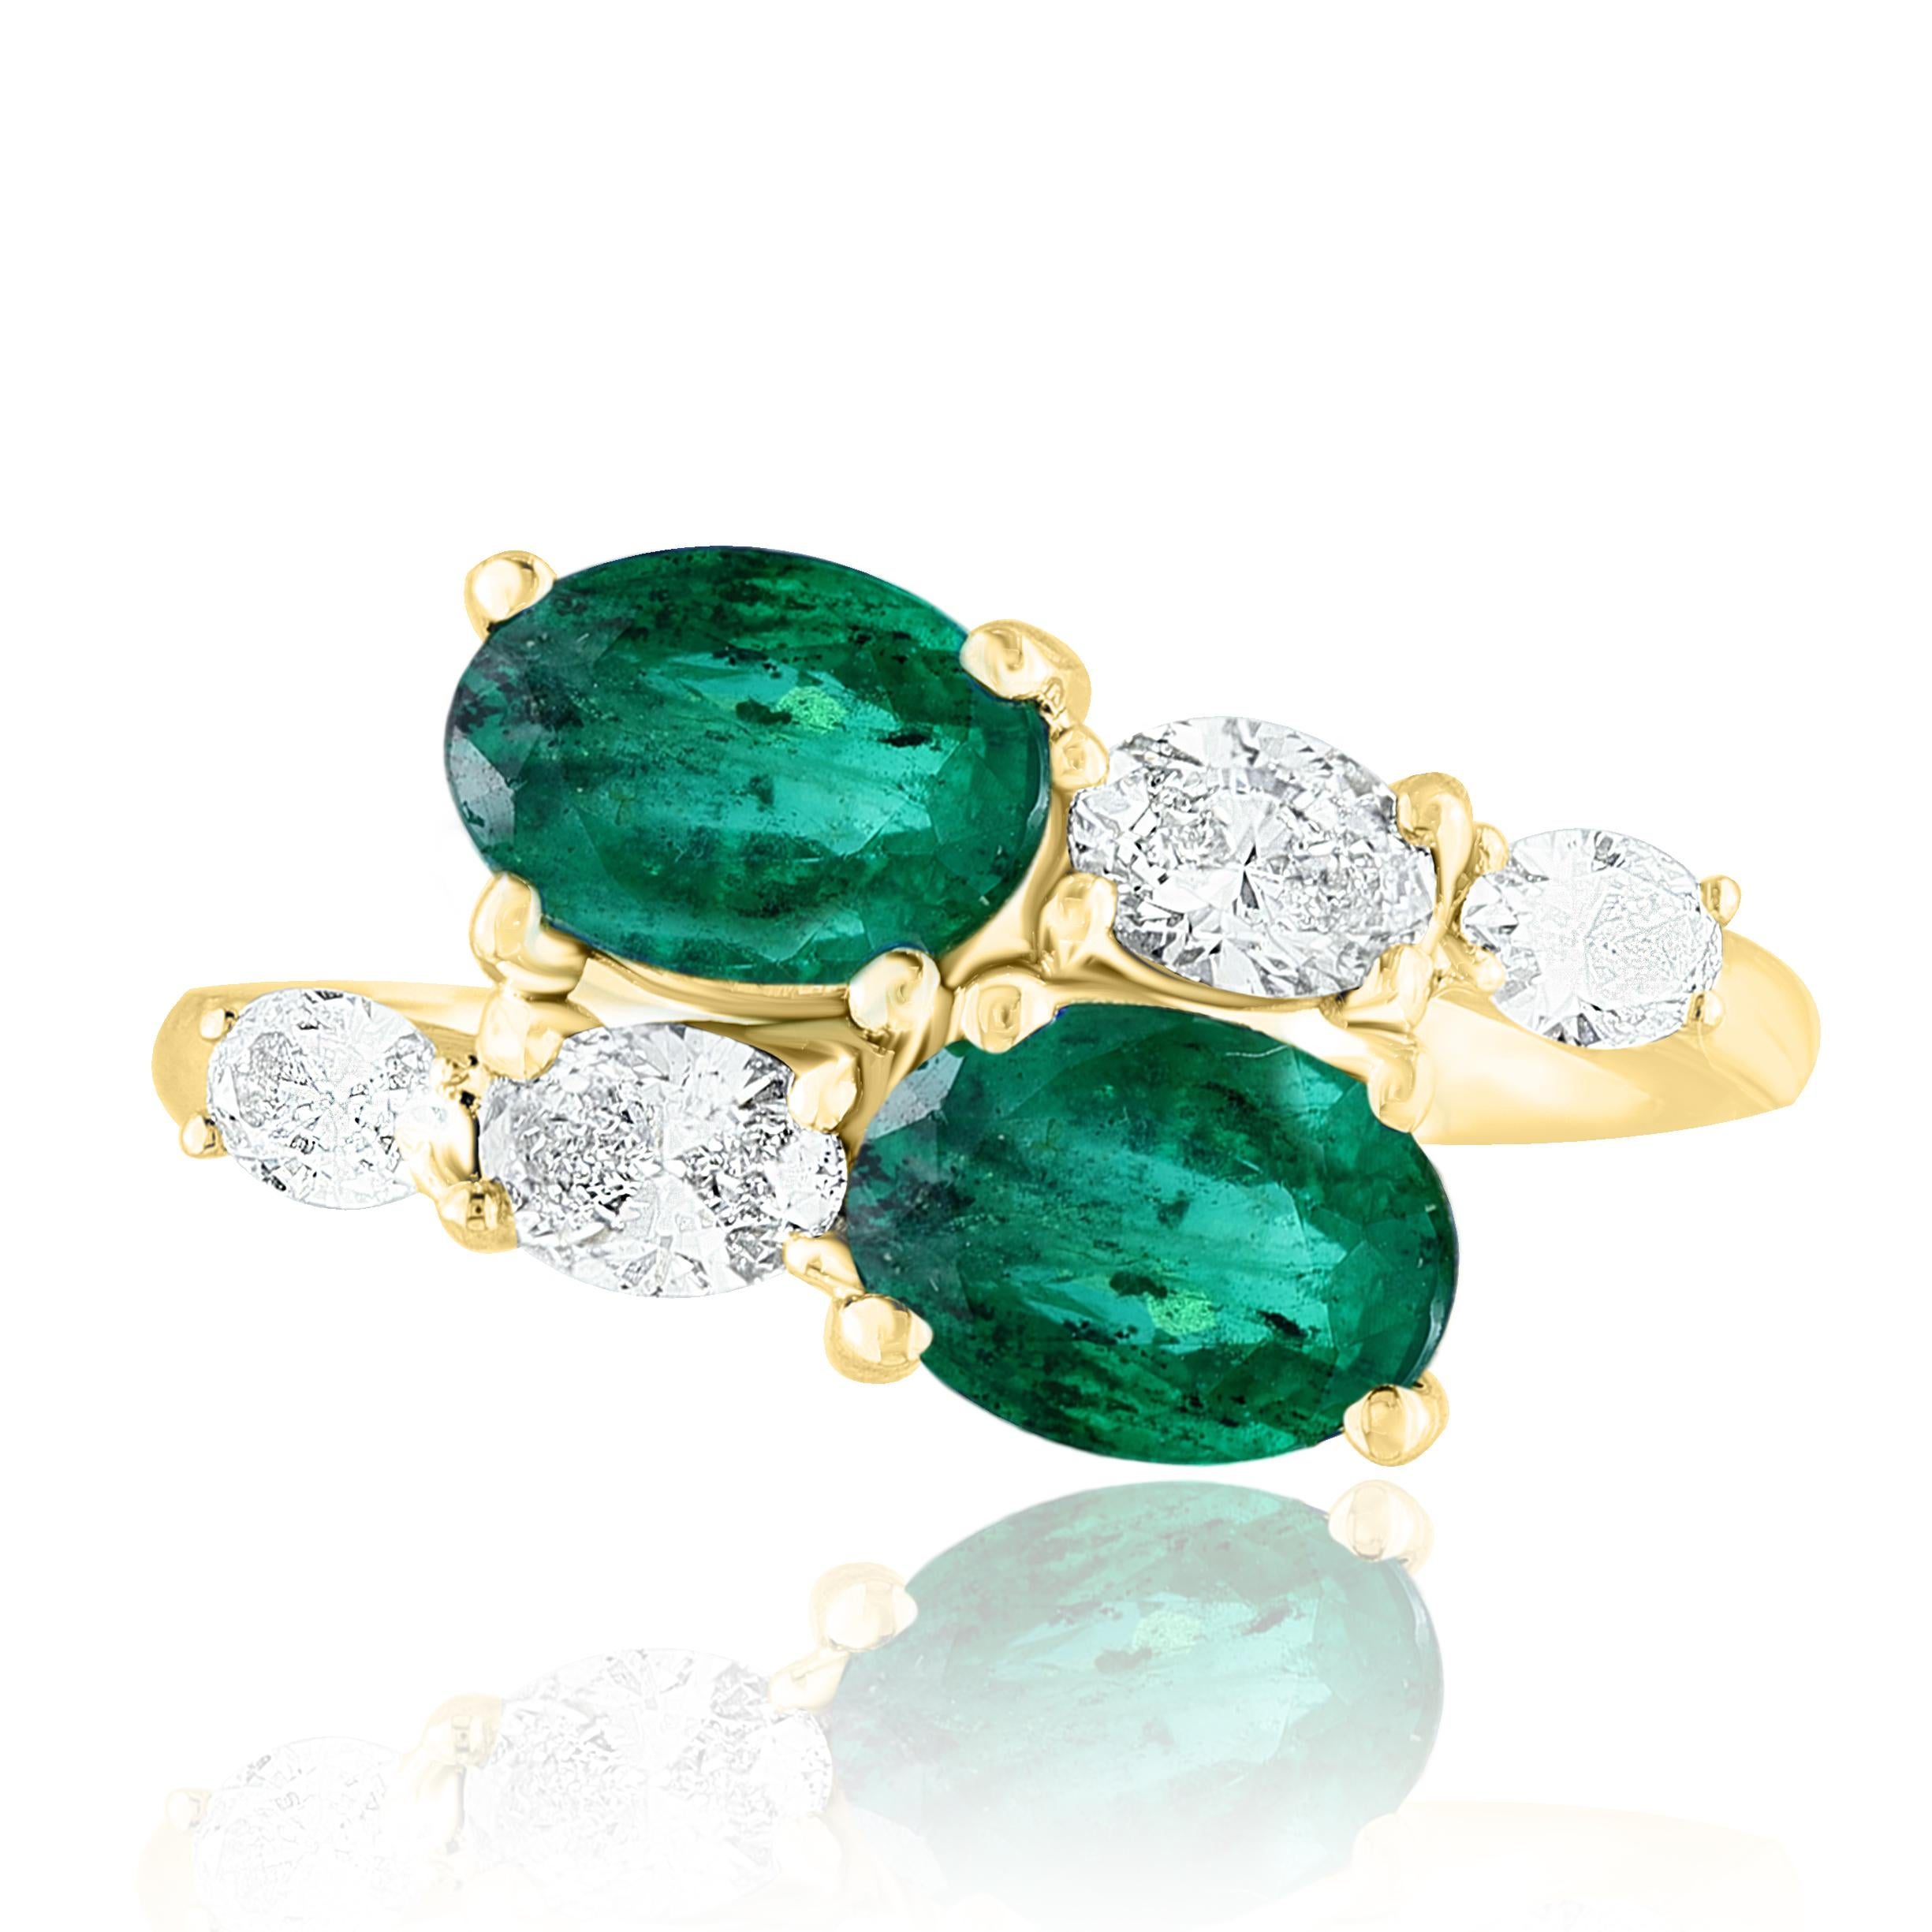 The stunning forever-together Toi et Moi ring features 2 Oval cut Emerald embraced by east to west 4 oval diamonds. Handcrafted in 14k Yellow Gold.
2 oval Emeralds in the center weigh 1.54 carats and 4 diamonds on the sides weigh 0.70 carats in